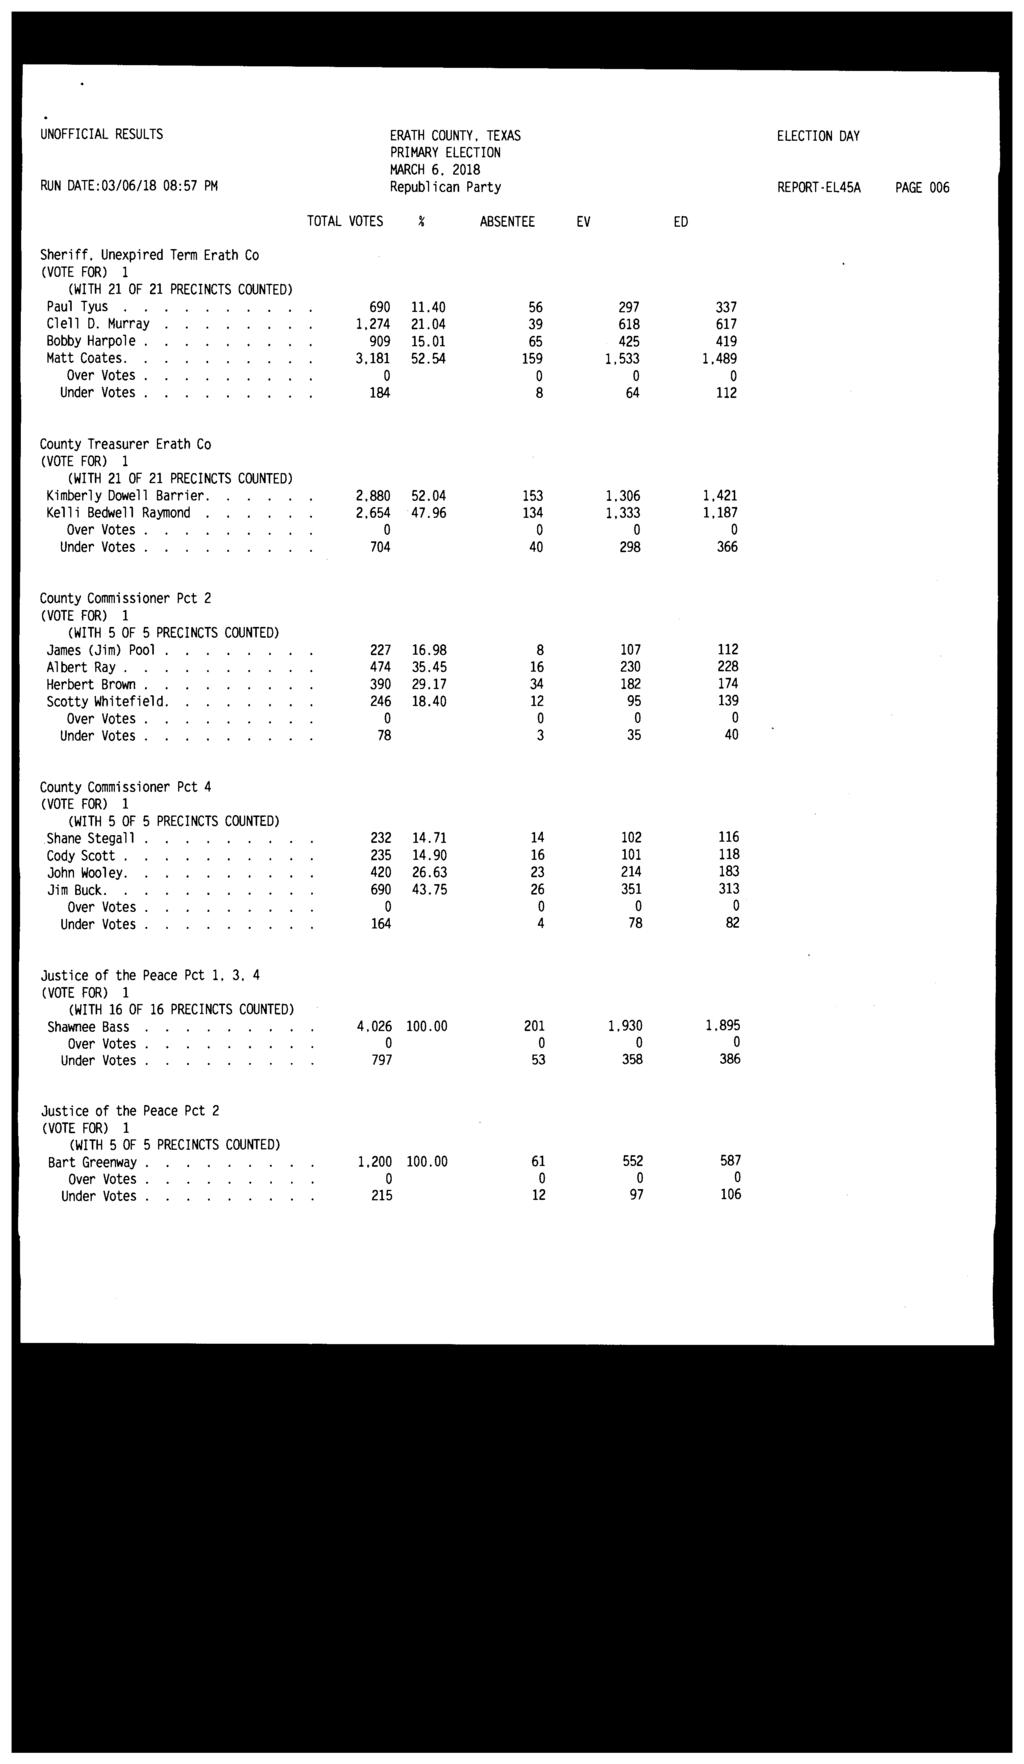 UNOFFICIAL RESULTS ERATH COUNTY, TEXAS ELECTION DAY MARCH 6. 2018 RUN DATE:03/06/18 08:57 PM Republican Party REPORT EL45A PAGE 006 Sheriff. Unexpired Term Erath Co Paul Tyus 690 ll.